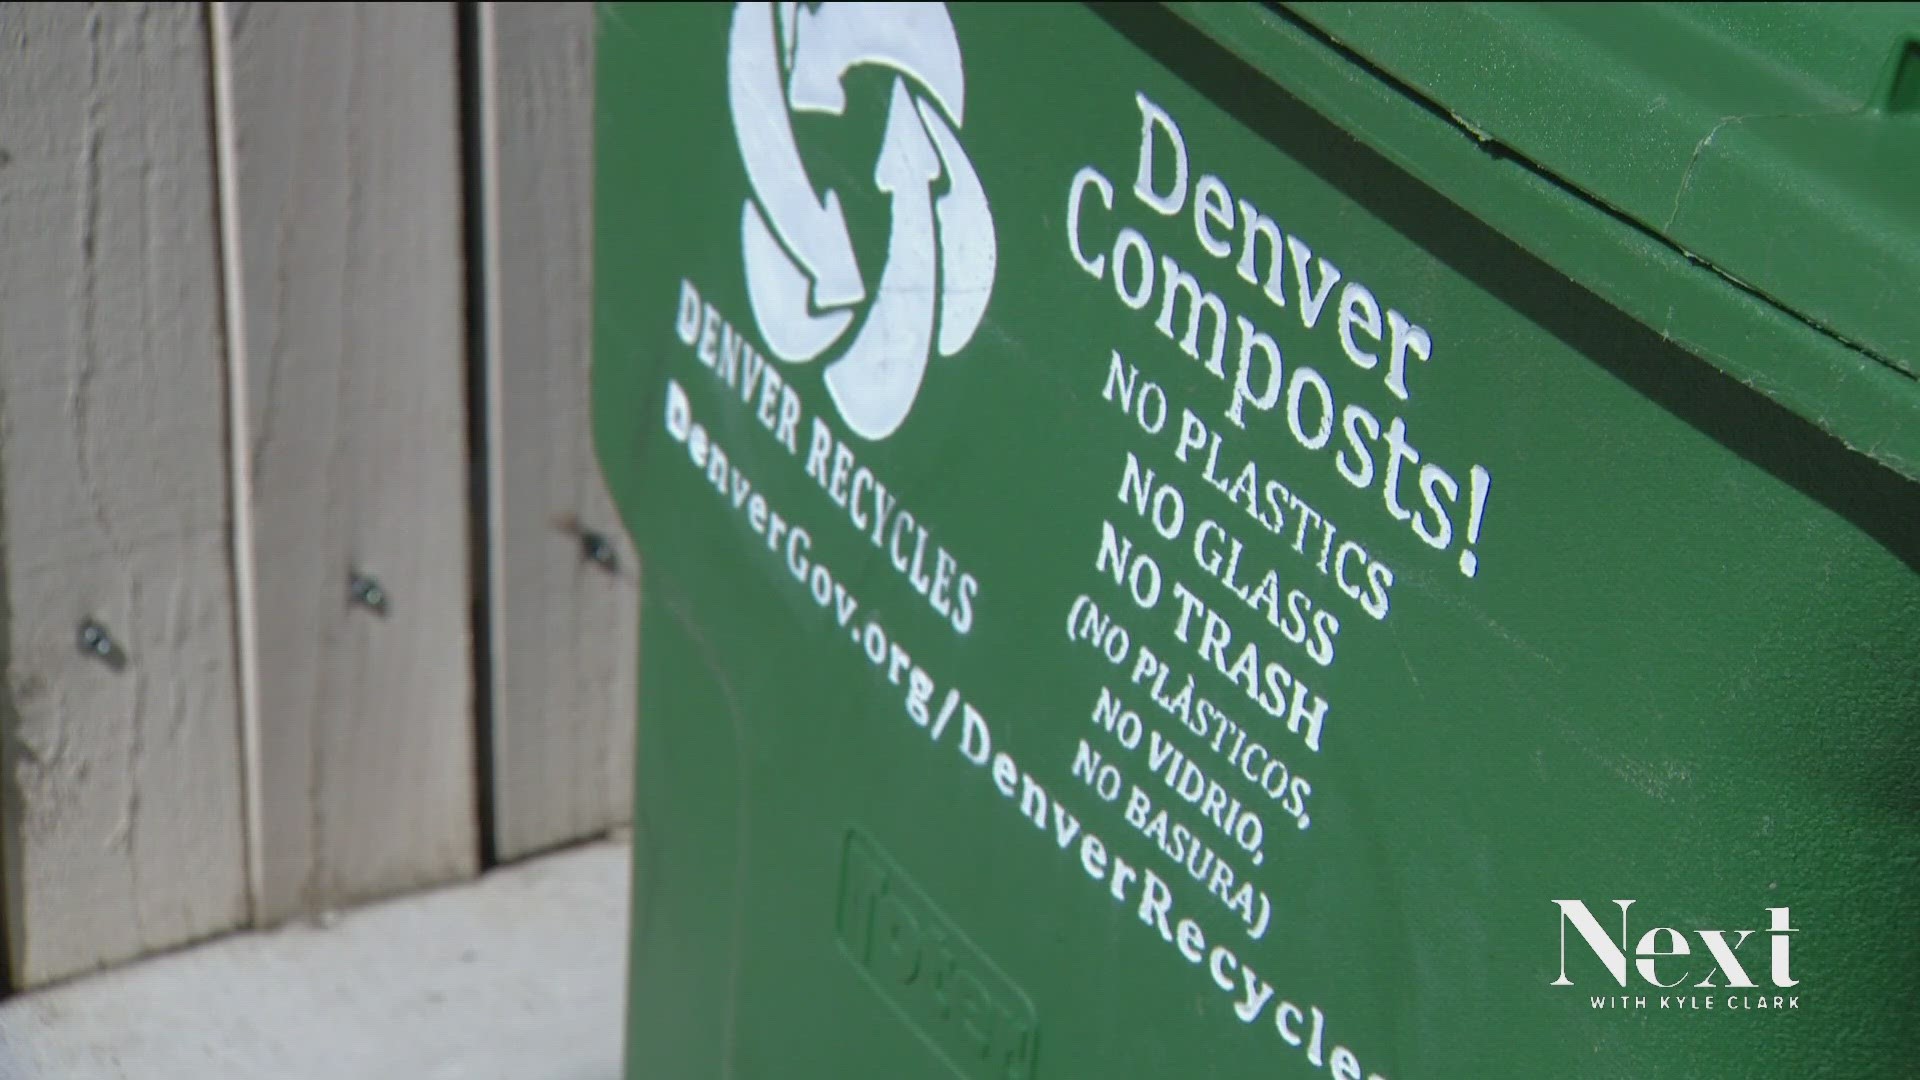 As part of a new 'pay as you throw' trash program in Denver, all residents are supposed to get compost bins, but most residents don't yet have them.